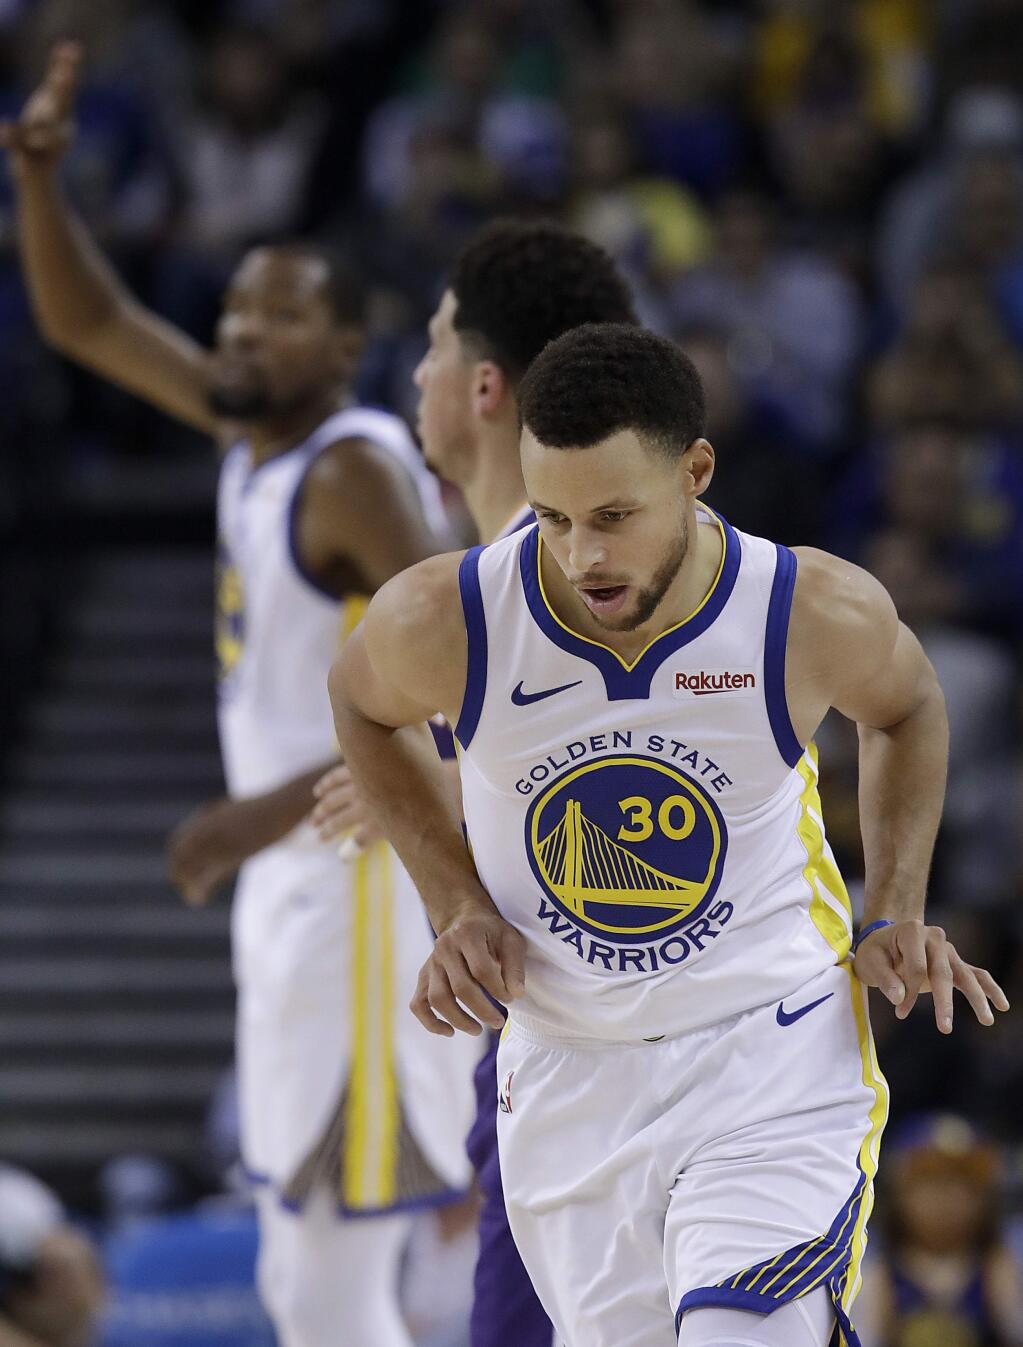 Golden State Warriors guard Stephen Curry (30) gestures after scoring against the Phoenix Suns during the first half of an NBA basketball game in Oakland, Calif., Monday, Oct. 22, 2018. (AP Photo/Jeff Chiu)